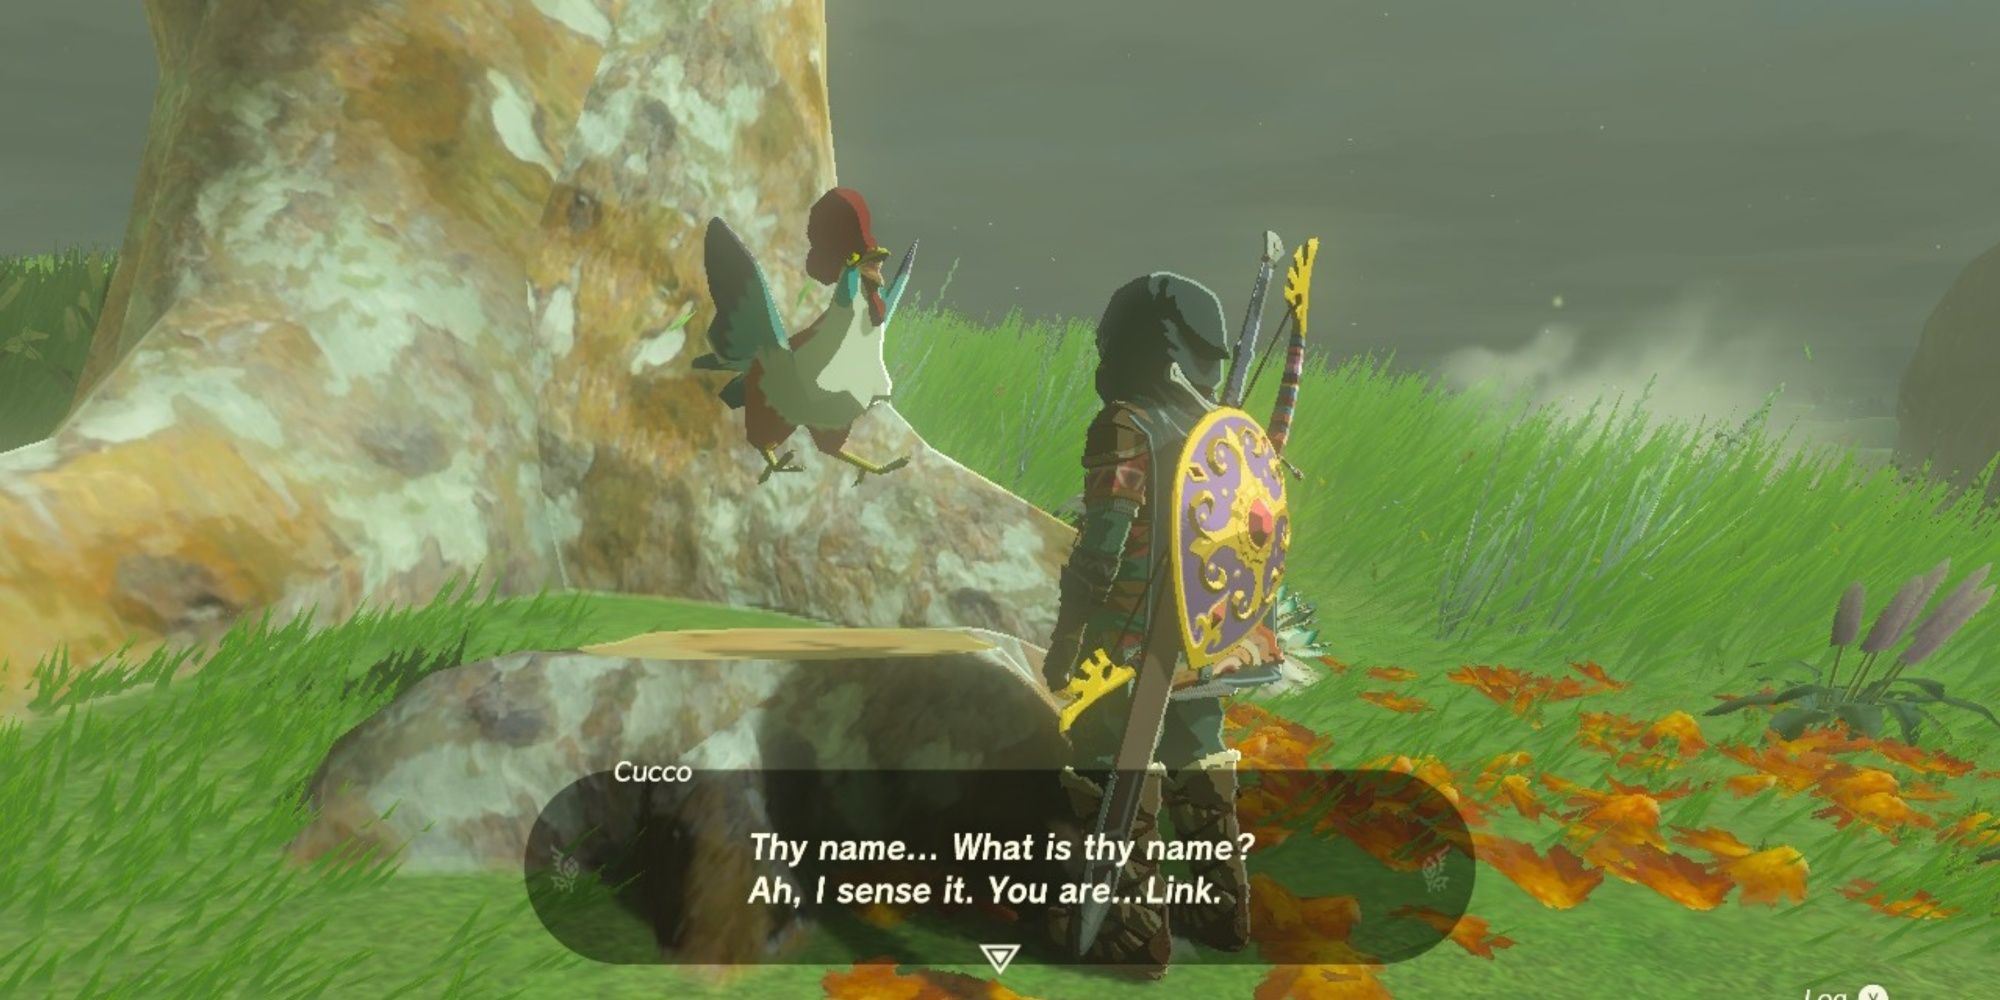 Kokko talking to Link in Tears of the Kingdom